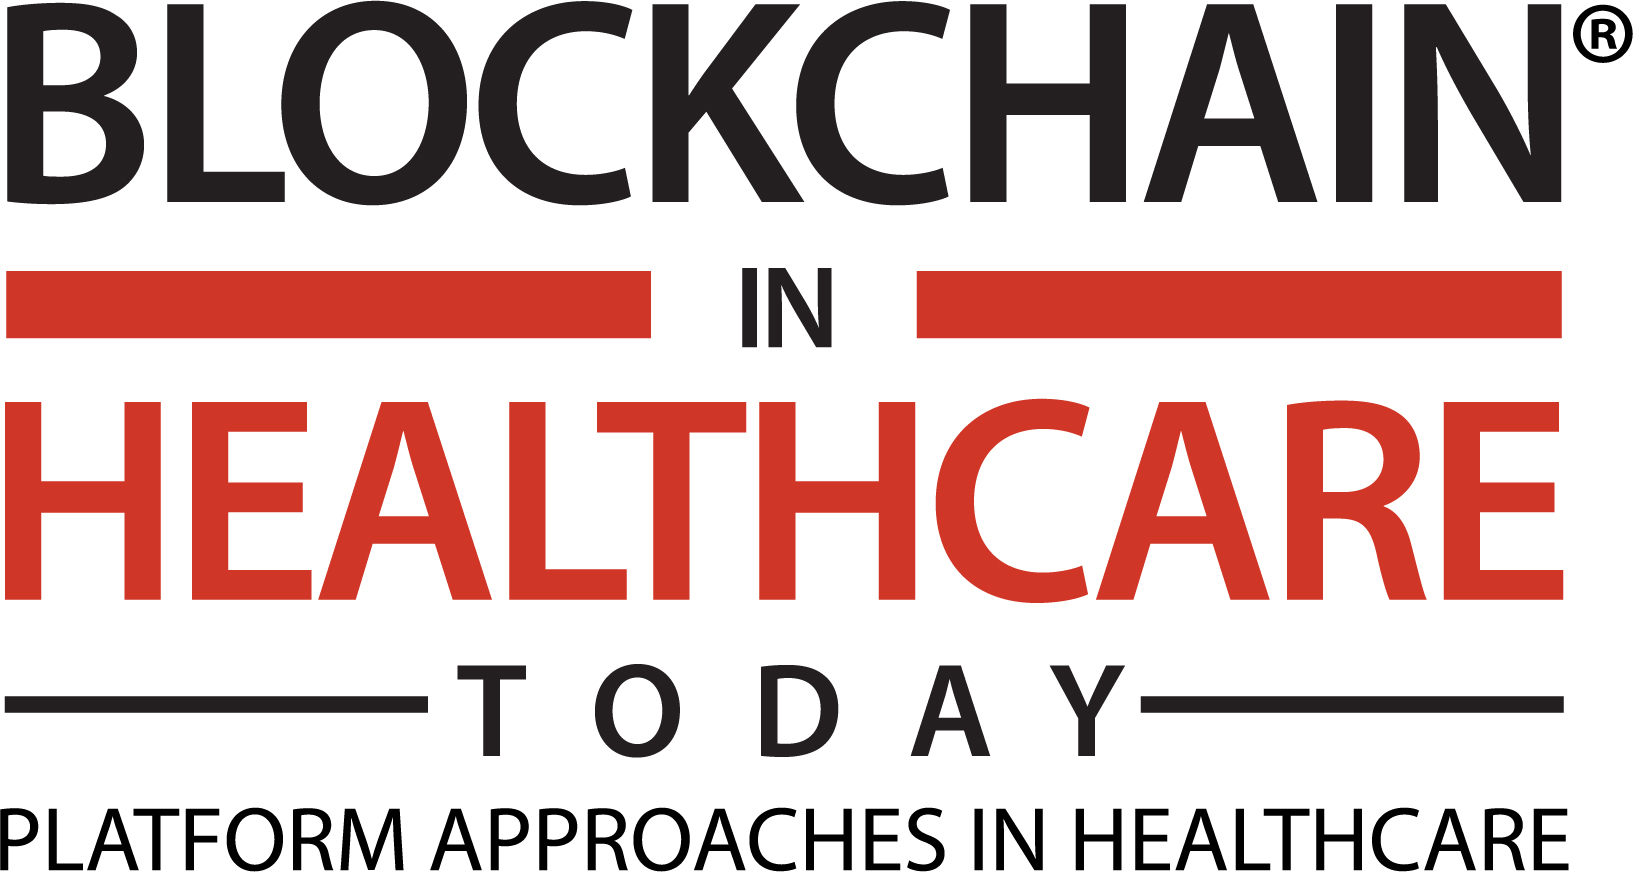 Blockchain in Healthcare Today (BHTY) is the world’s first peer reviewed journal that amplifies and disseminates distributed ledger technology research and innovations in  healthcare information systems, clinical computing and network technologies and biomedical sciences.